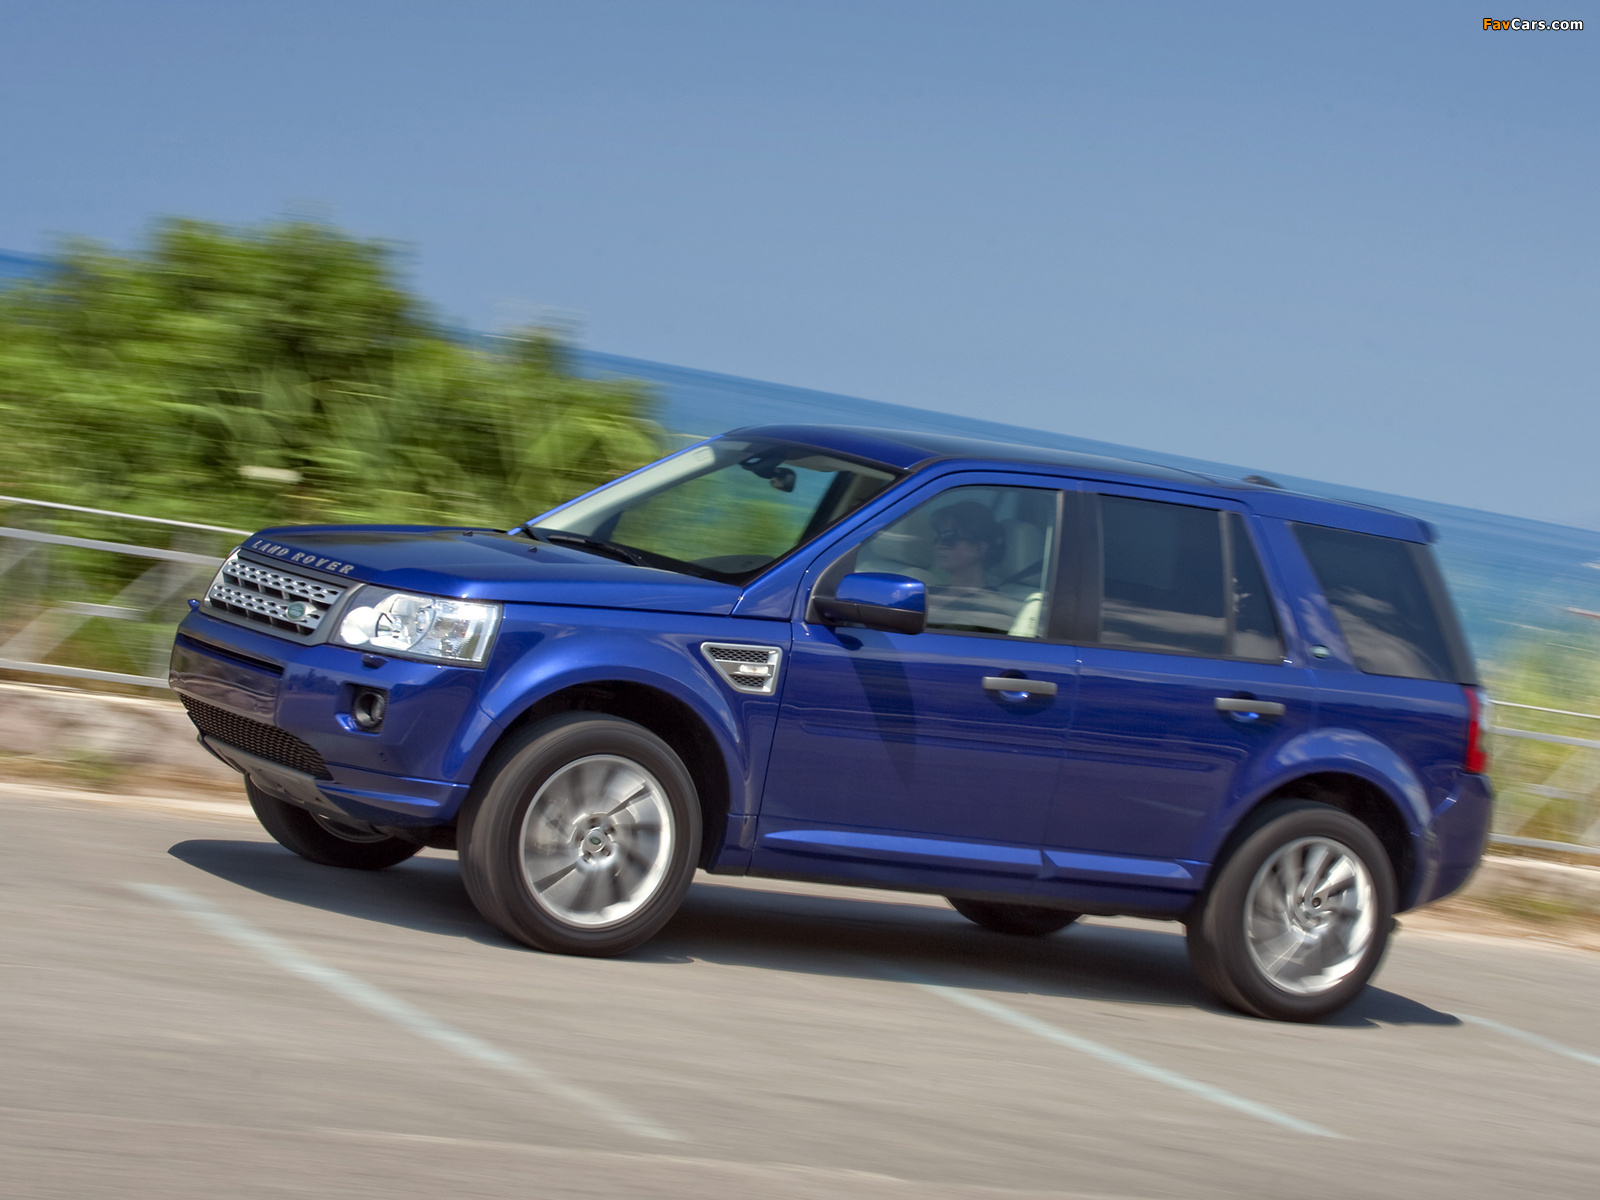 Land Rover Freelander 2 2010 pictures (1600 x 1200)